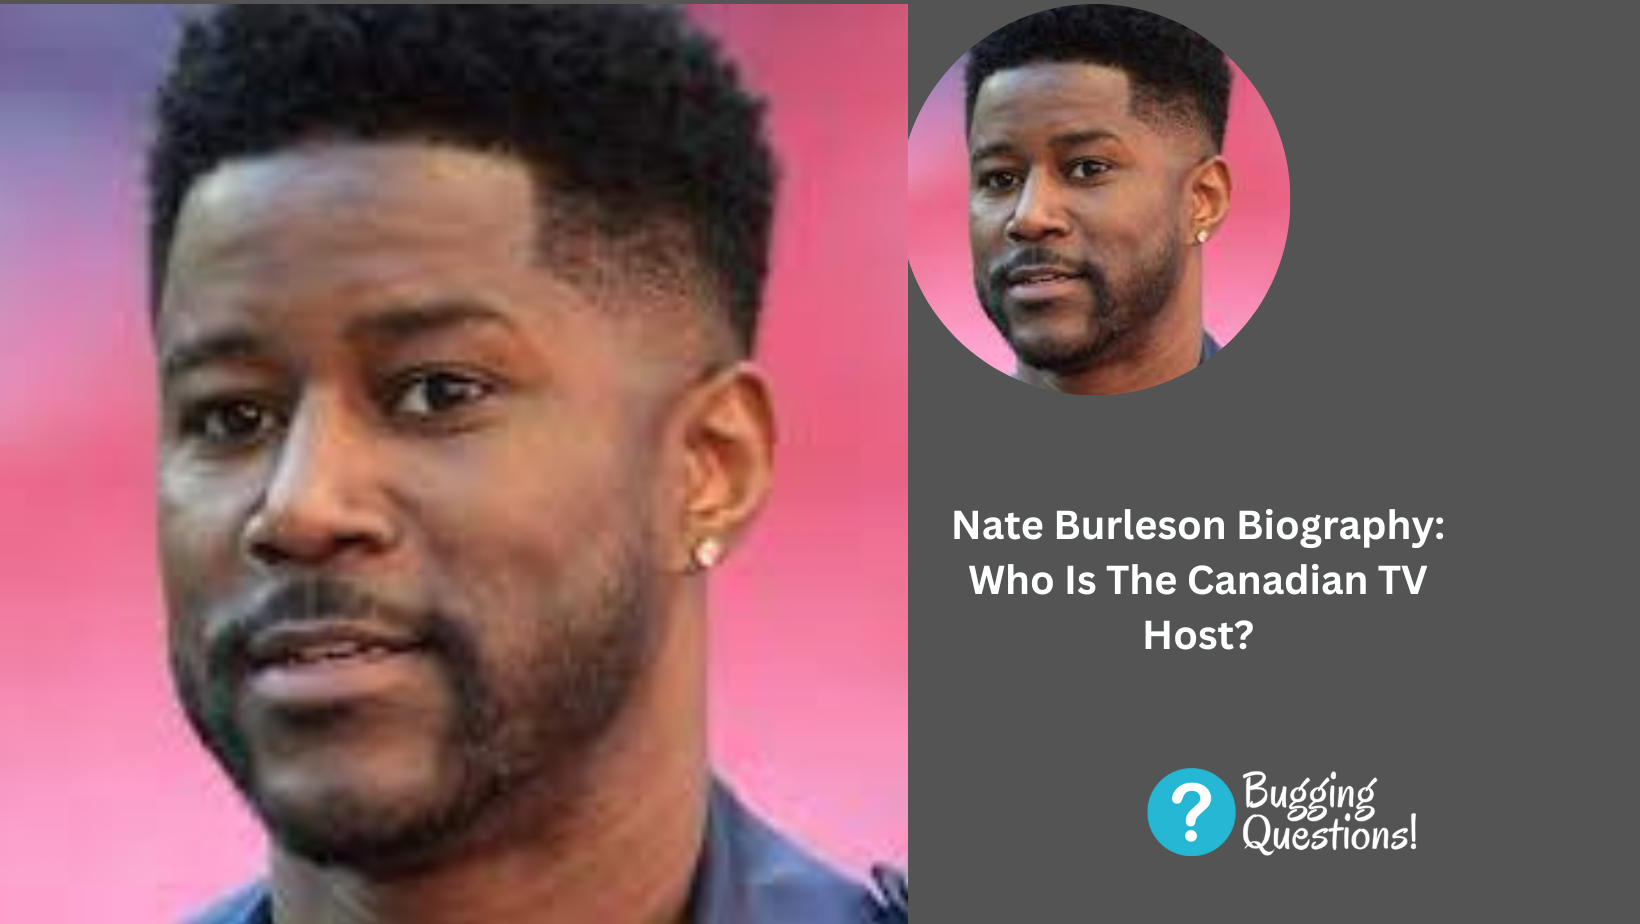 Nate Burleson Biography: Who Is The Canadian TV Host?